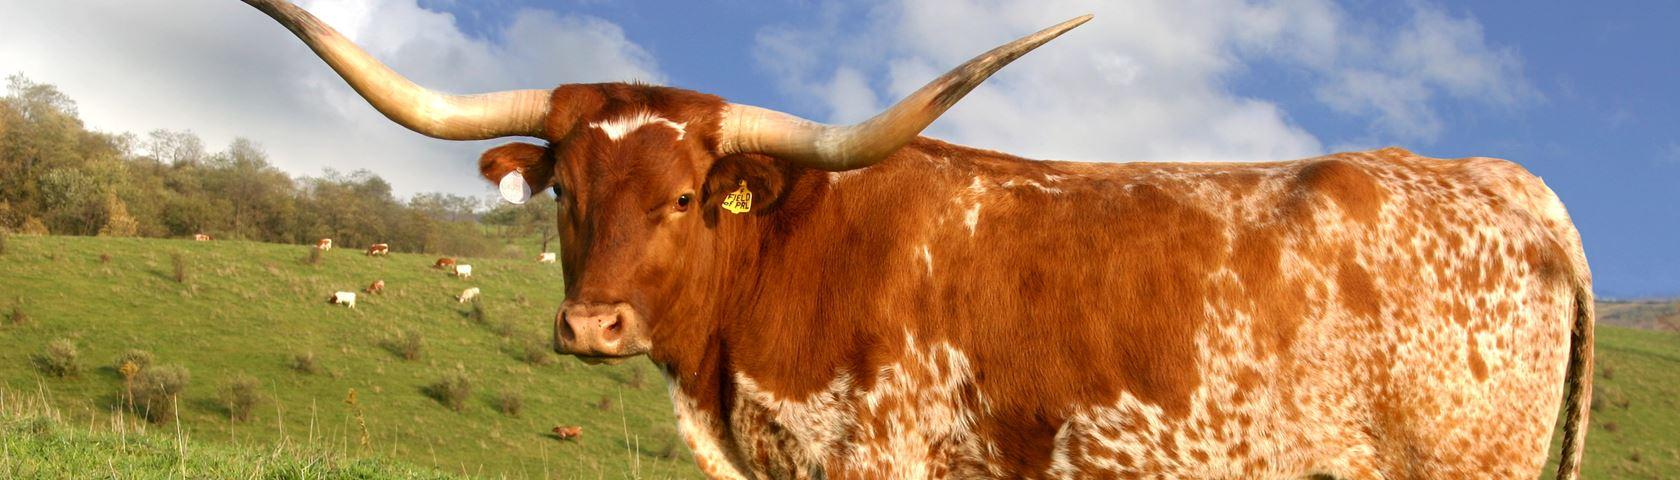 Texas Longhorn Cow • Image • WallpaperFusion by Binary Fortress Software